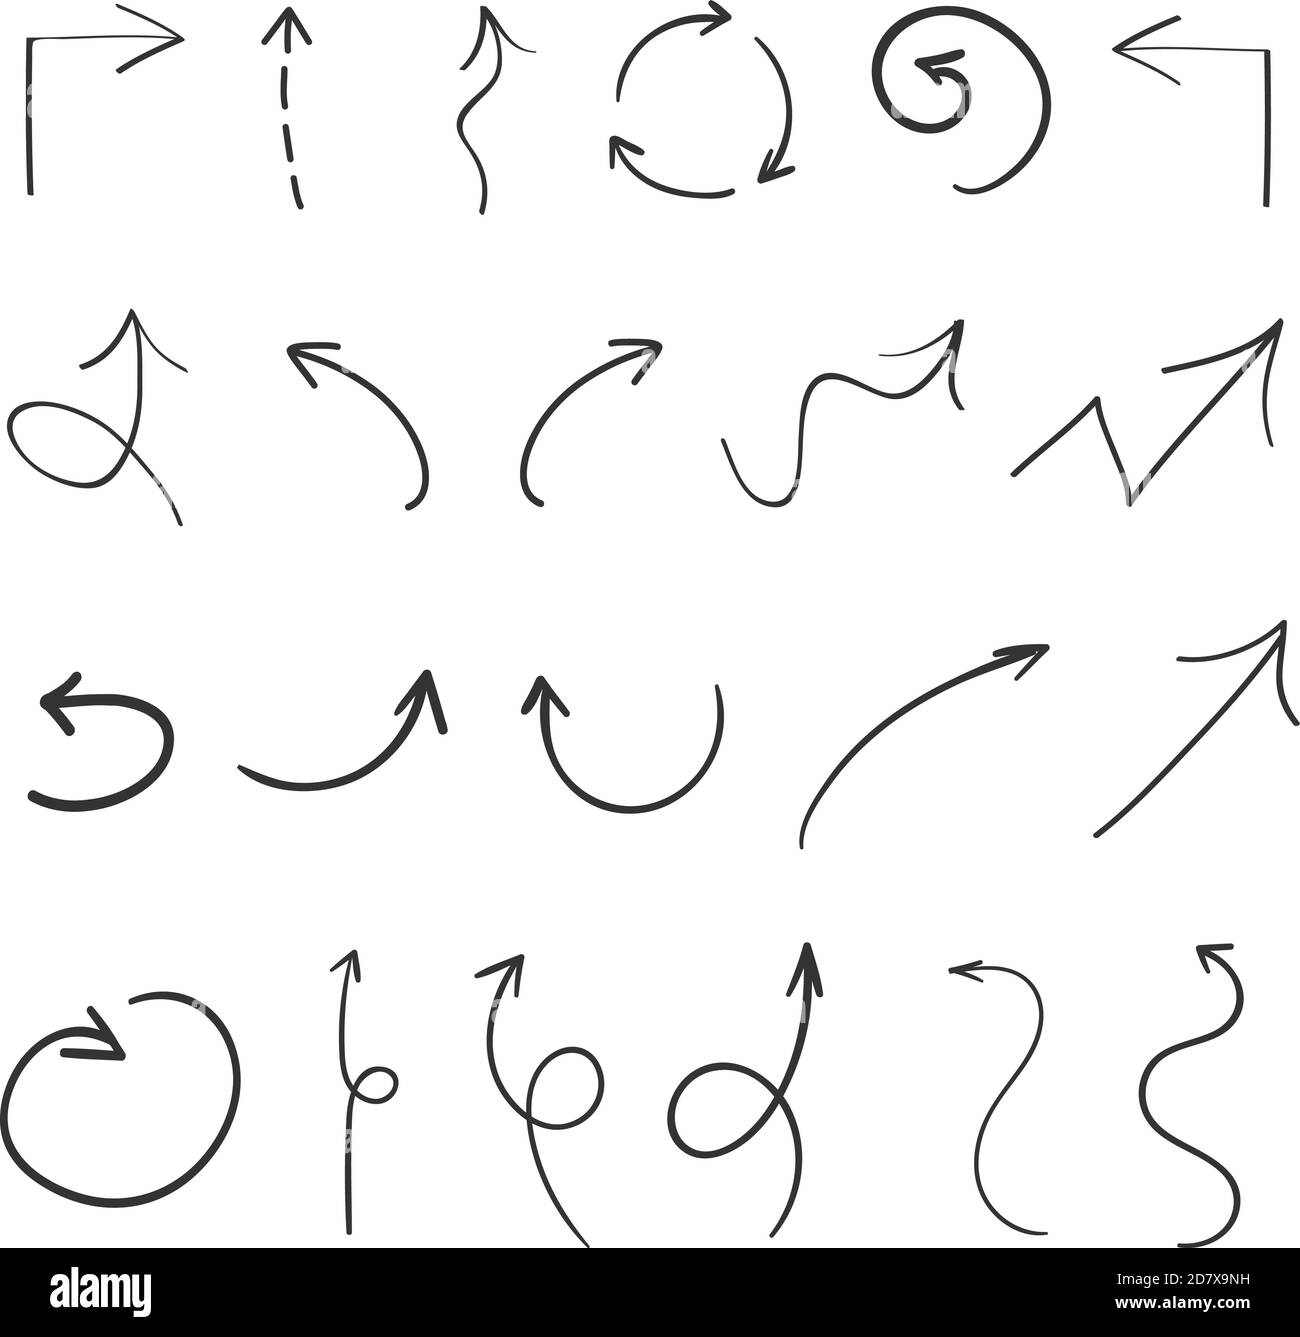 The hand drawn arrow collection set on white background Stock Vector